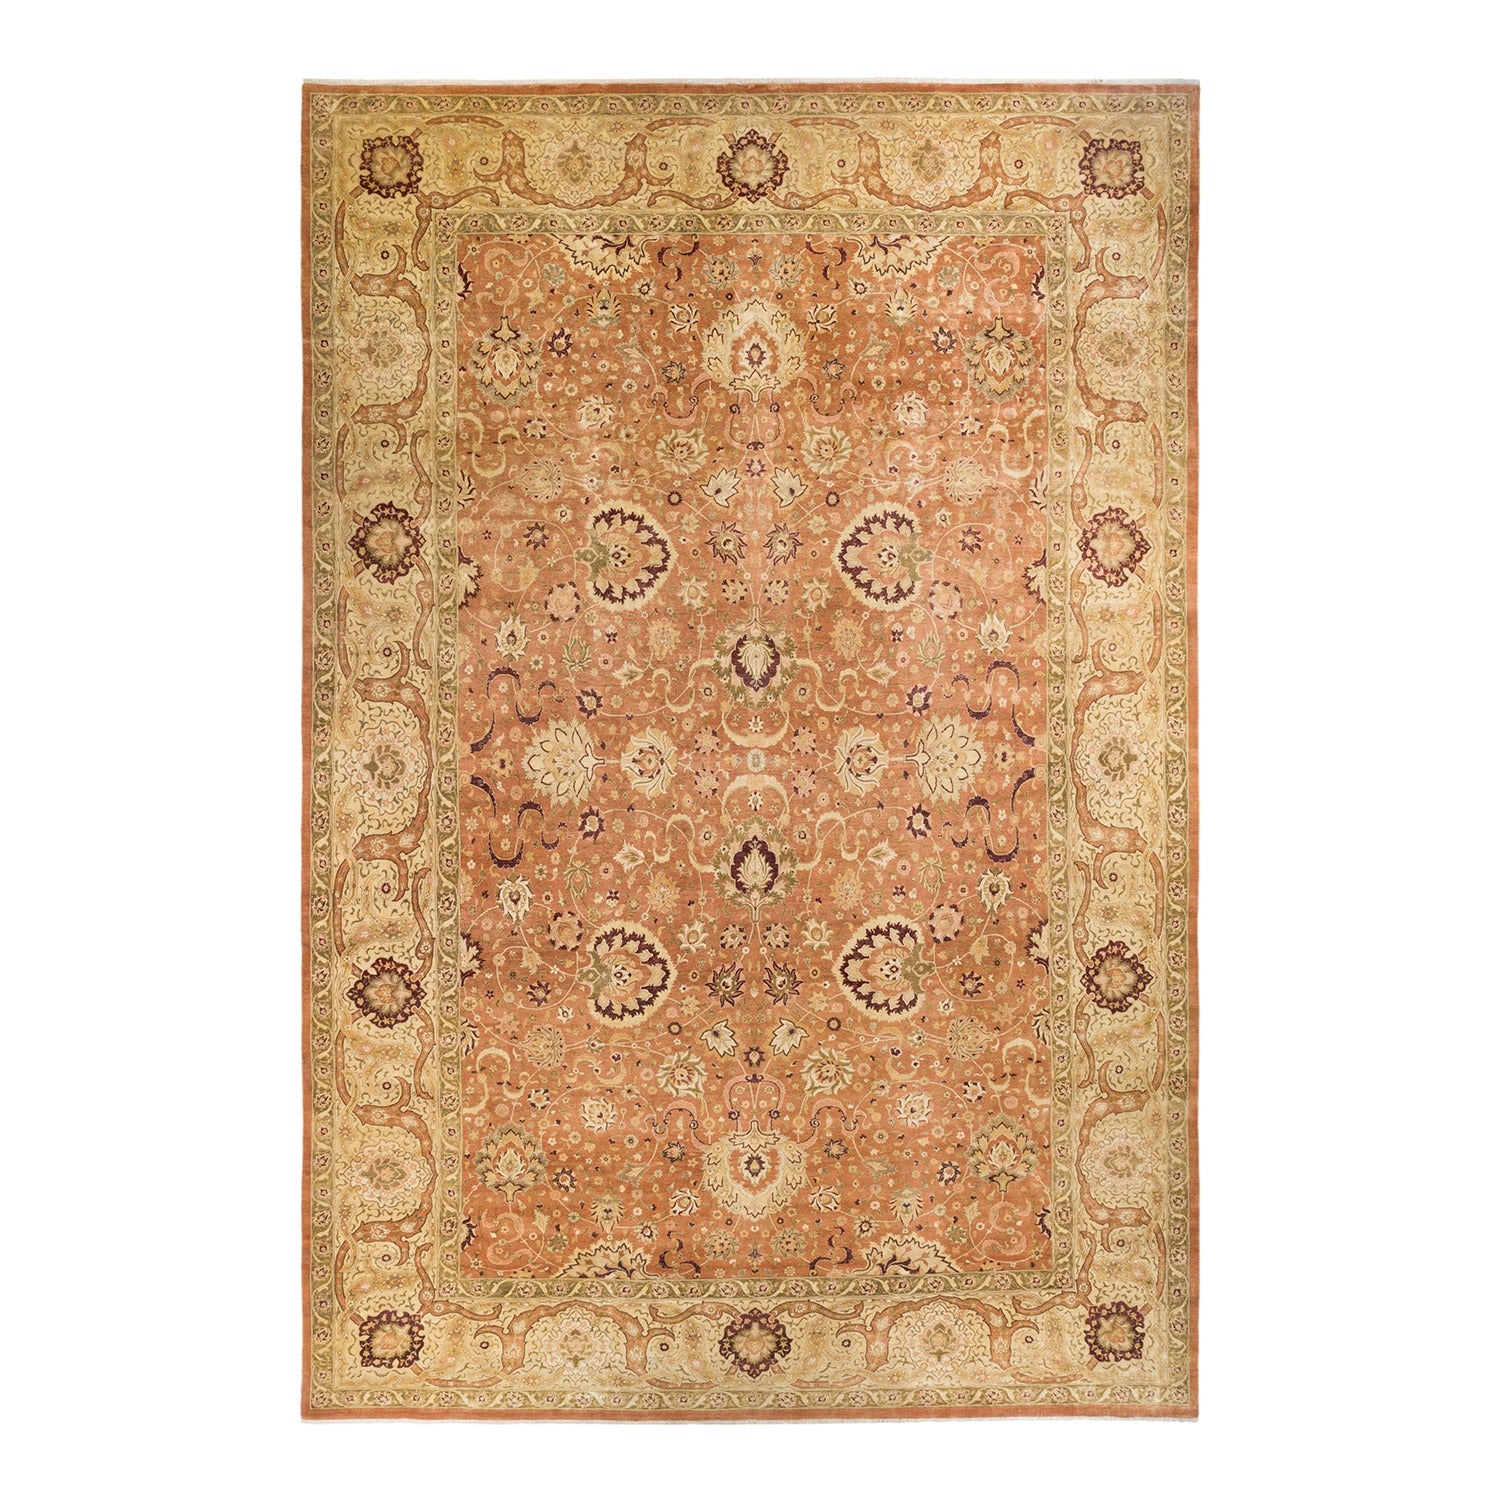 Ornate Oriental rug with complex floral and geometric designs.